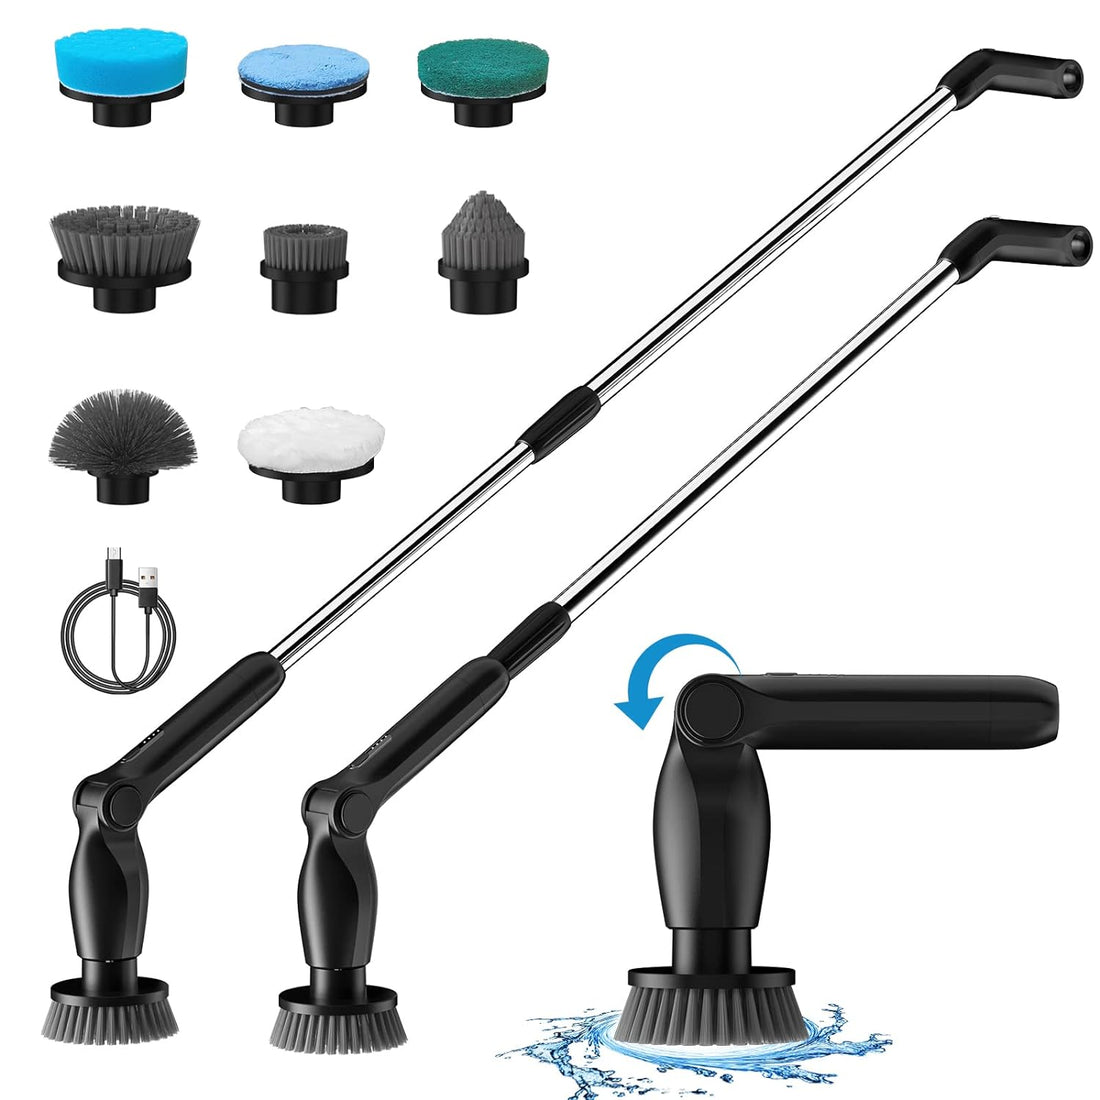 Electric Spin Scrubber, Leebein 2023 Cordless Cleaning Brush with Long Handle and 8 Replaceable Brush Heads, 2 Rotating Speed Shower Scrubber for Bathroom Tub, Floor, Tile, Kitchen, Car Wash (Black)